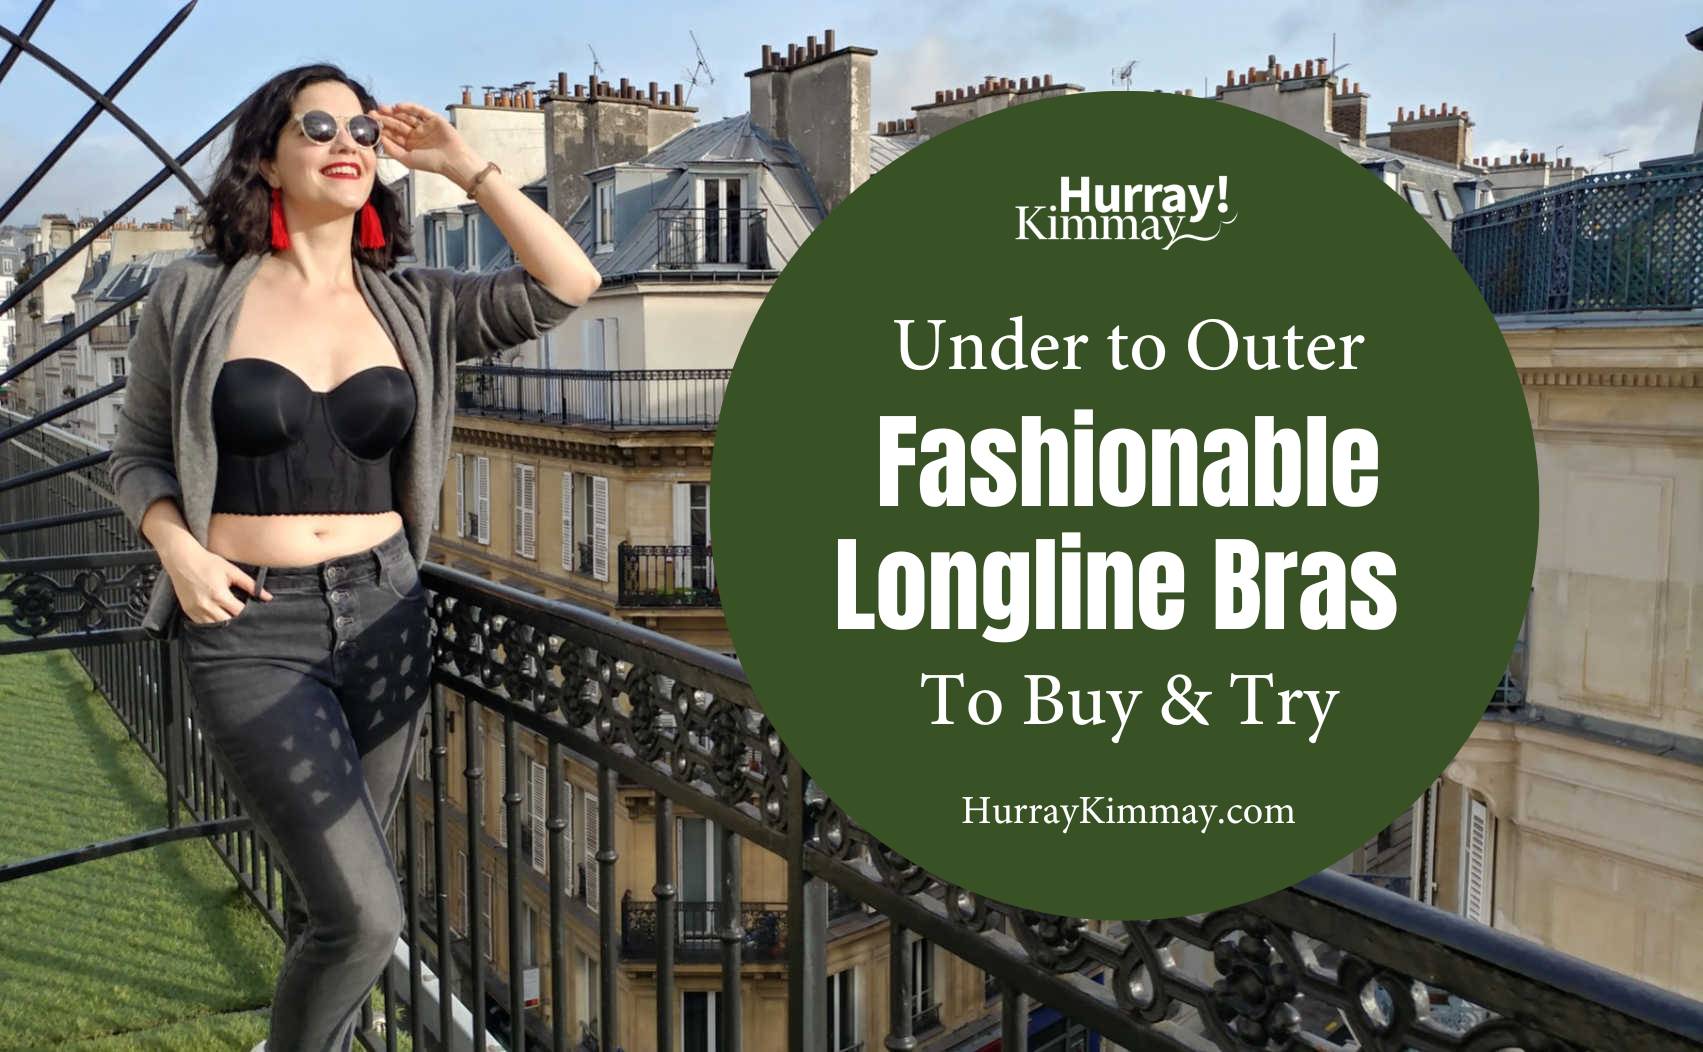 How to Wear and Style Fashionable Longline Bras - Hurray Kimmay